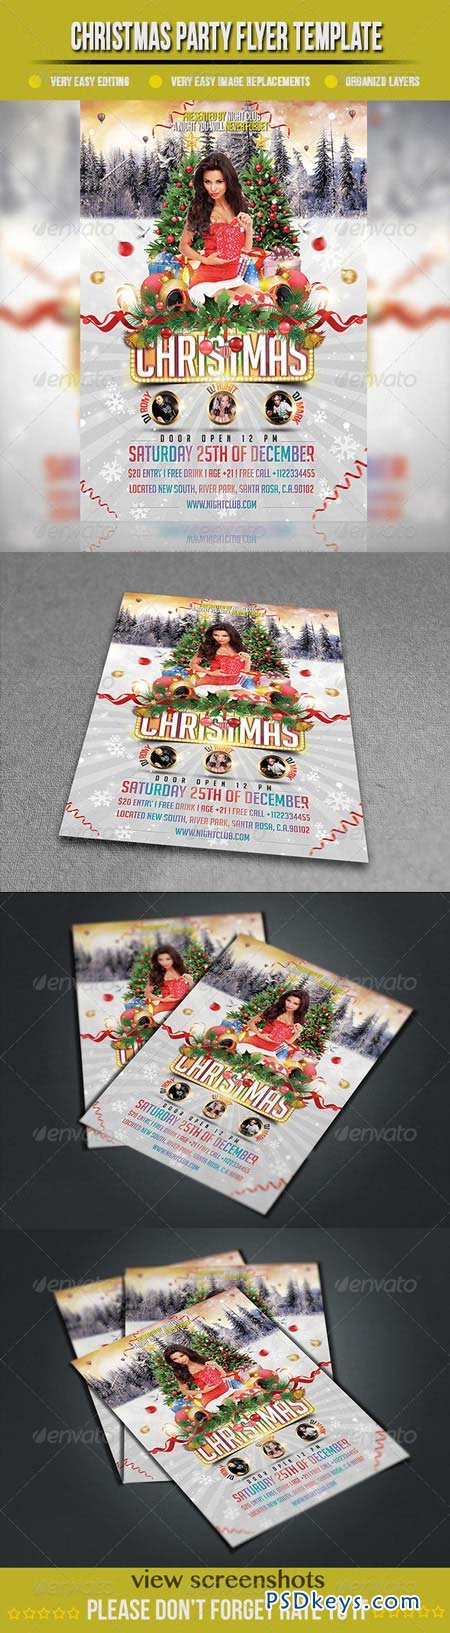 Christmas Party Flyer Template 3477501